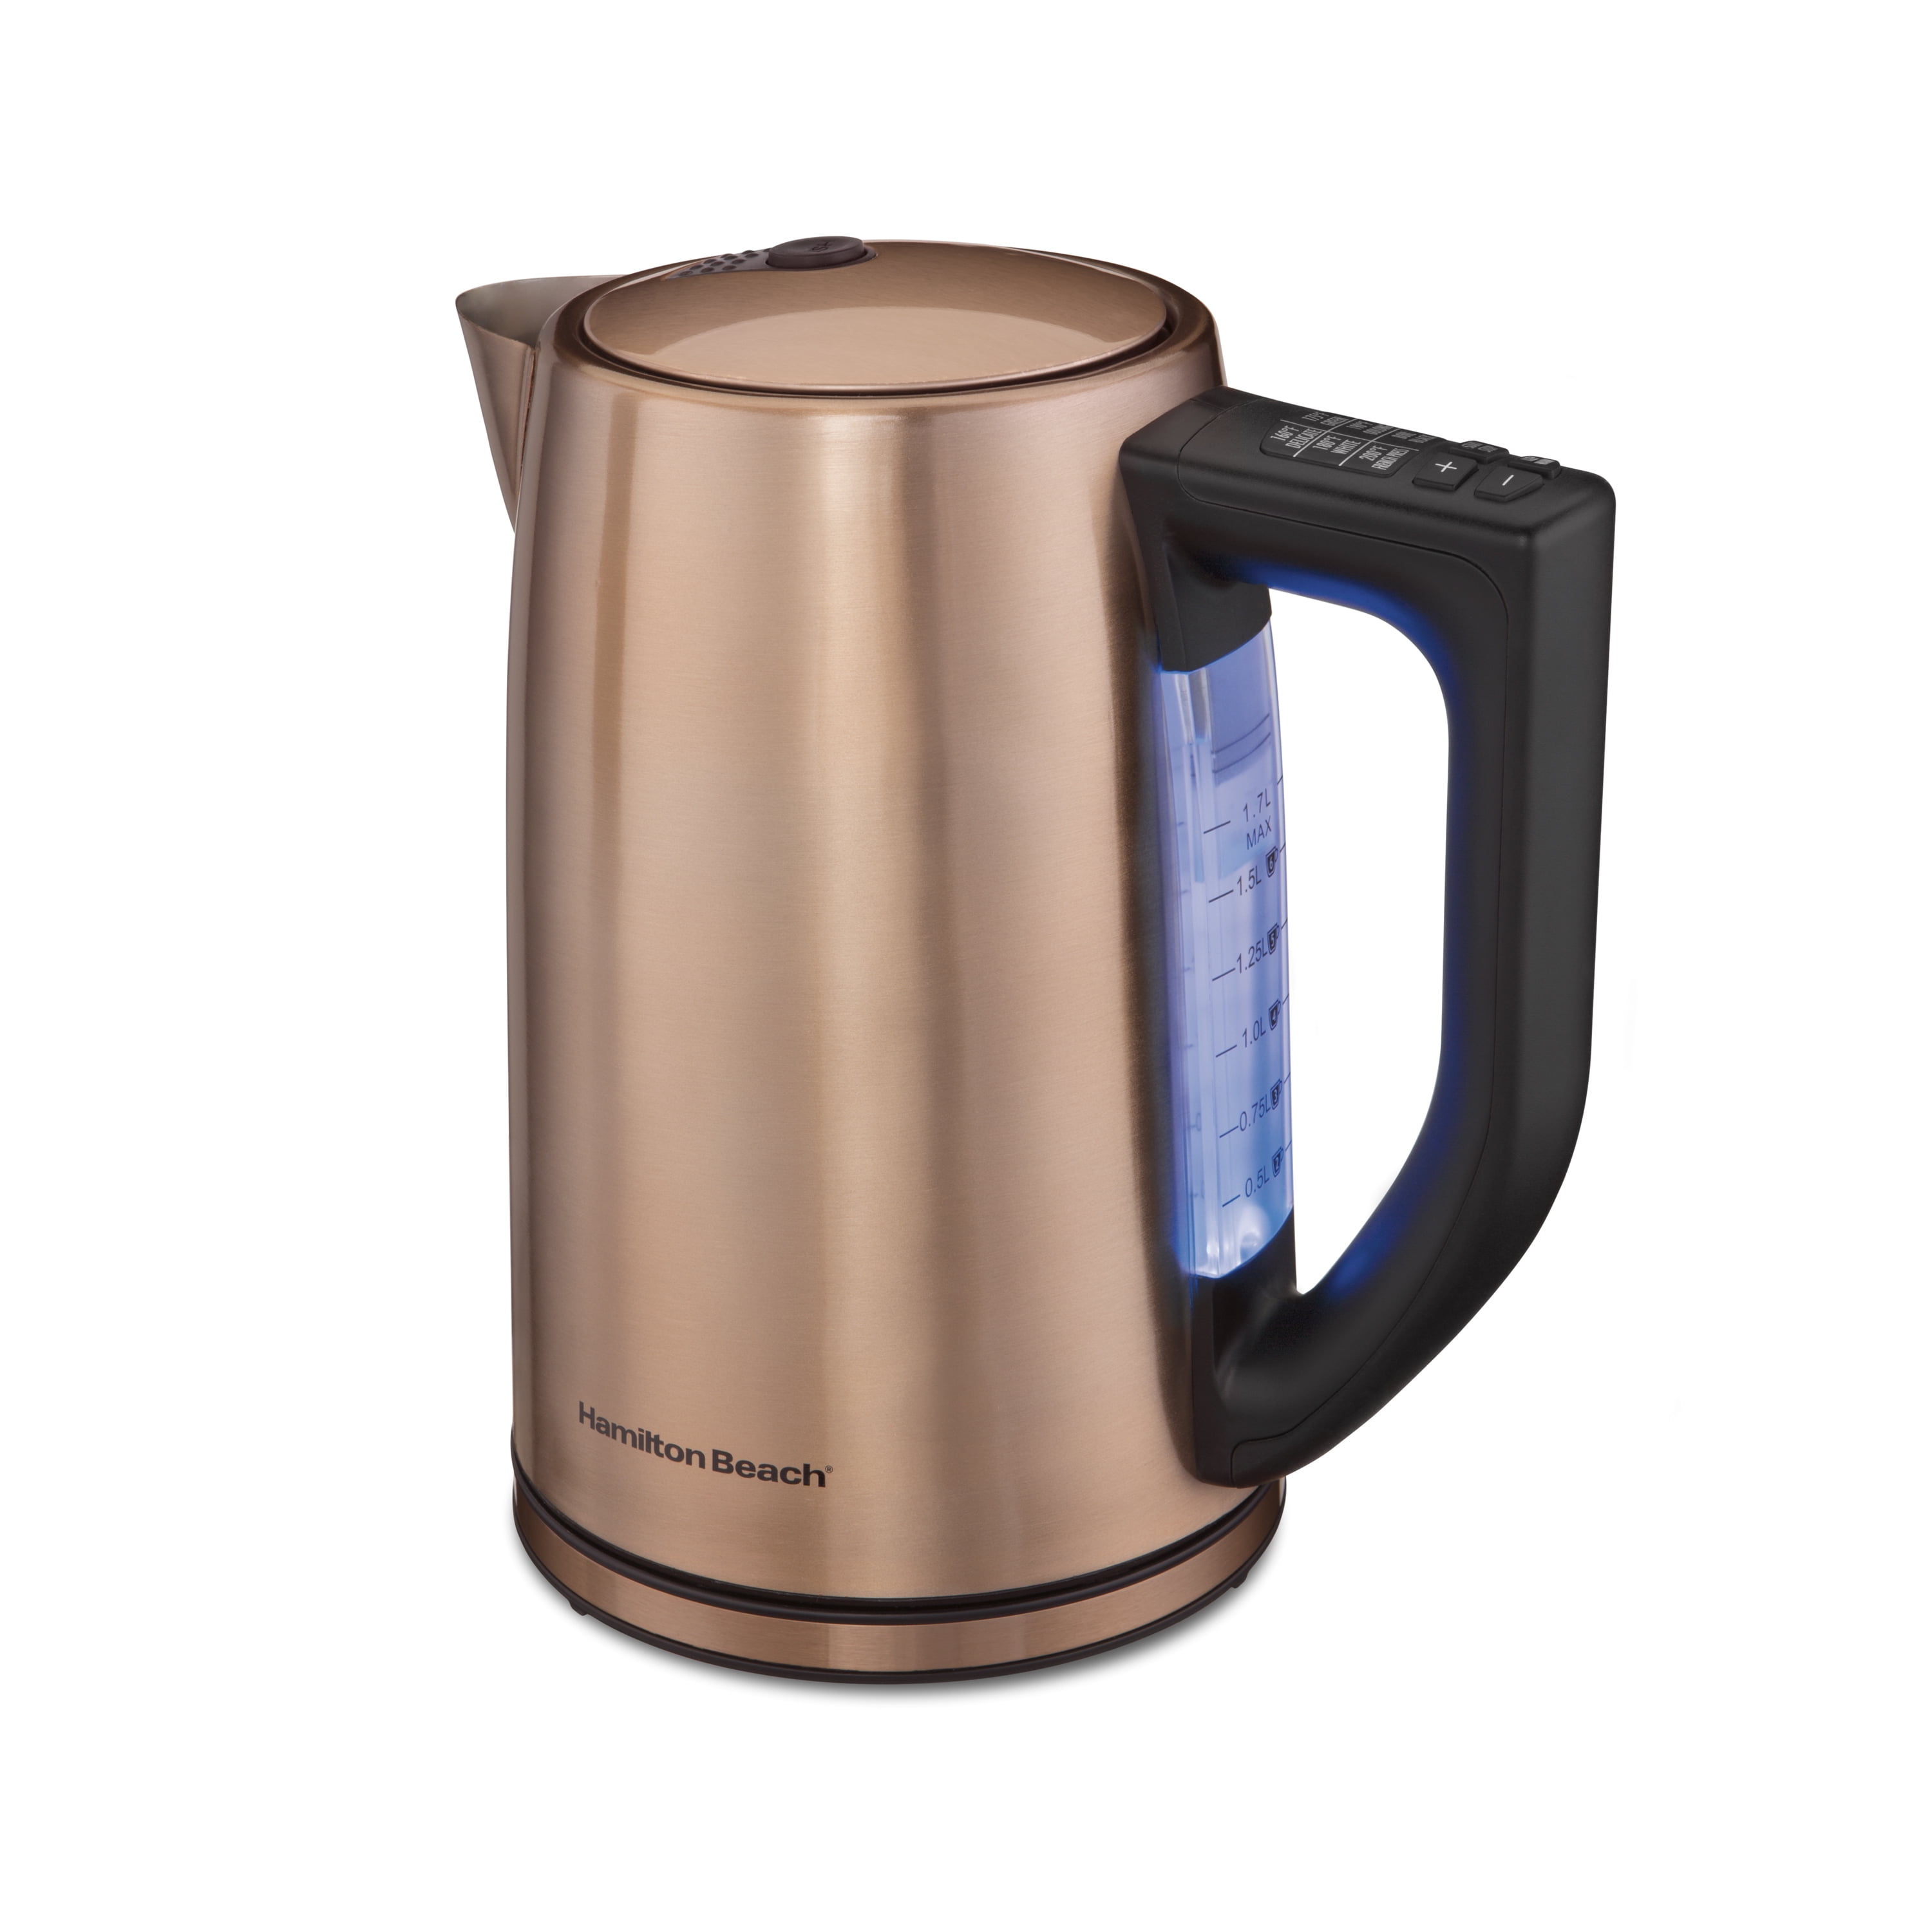 sale: Get a Hamilton Beach kettle, wrapping paper and more